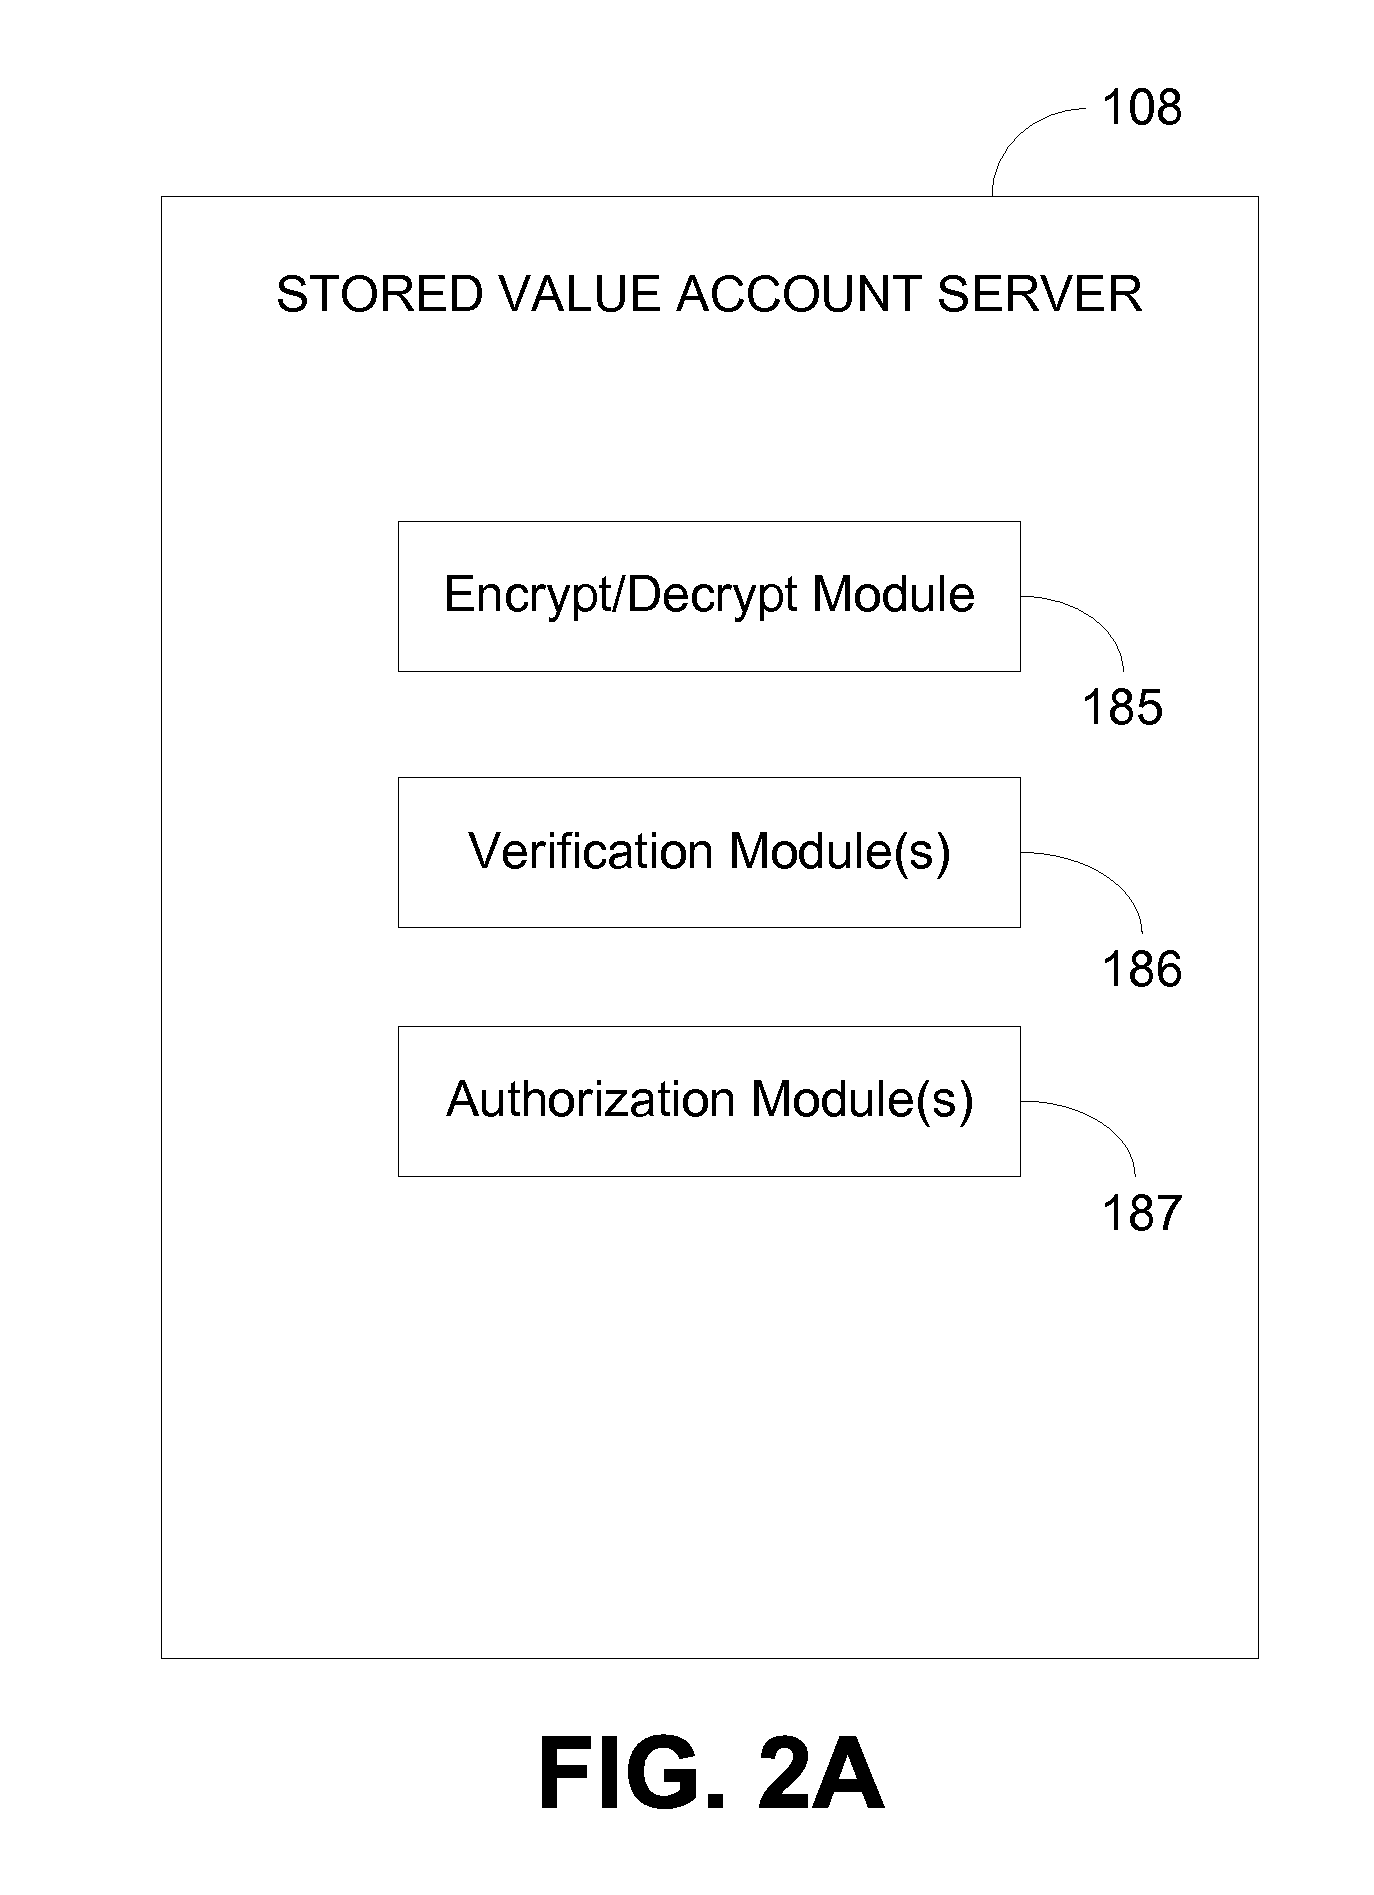 System and method for point of service payment acceptance via wireless communication